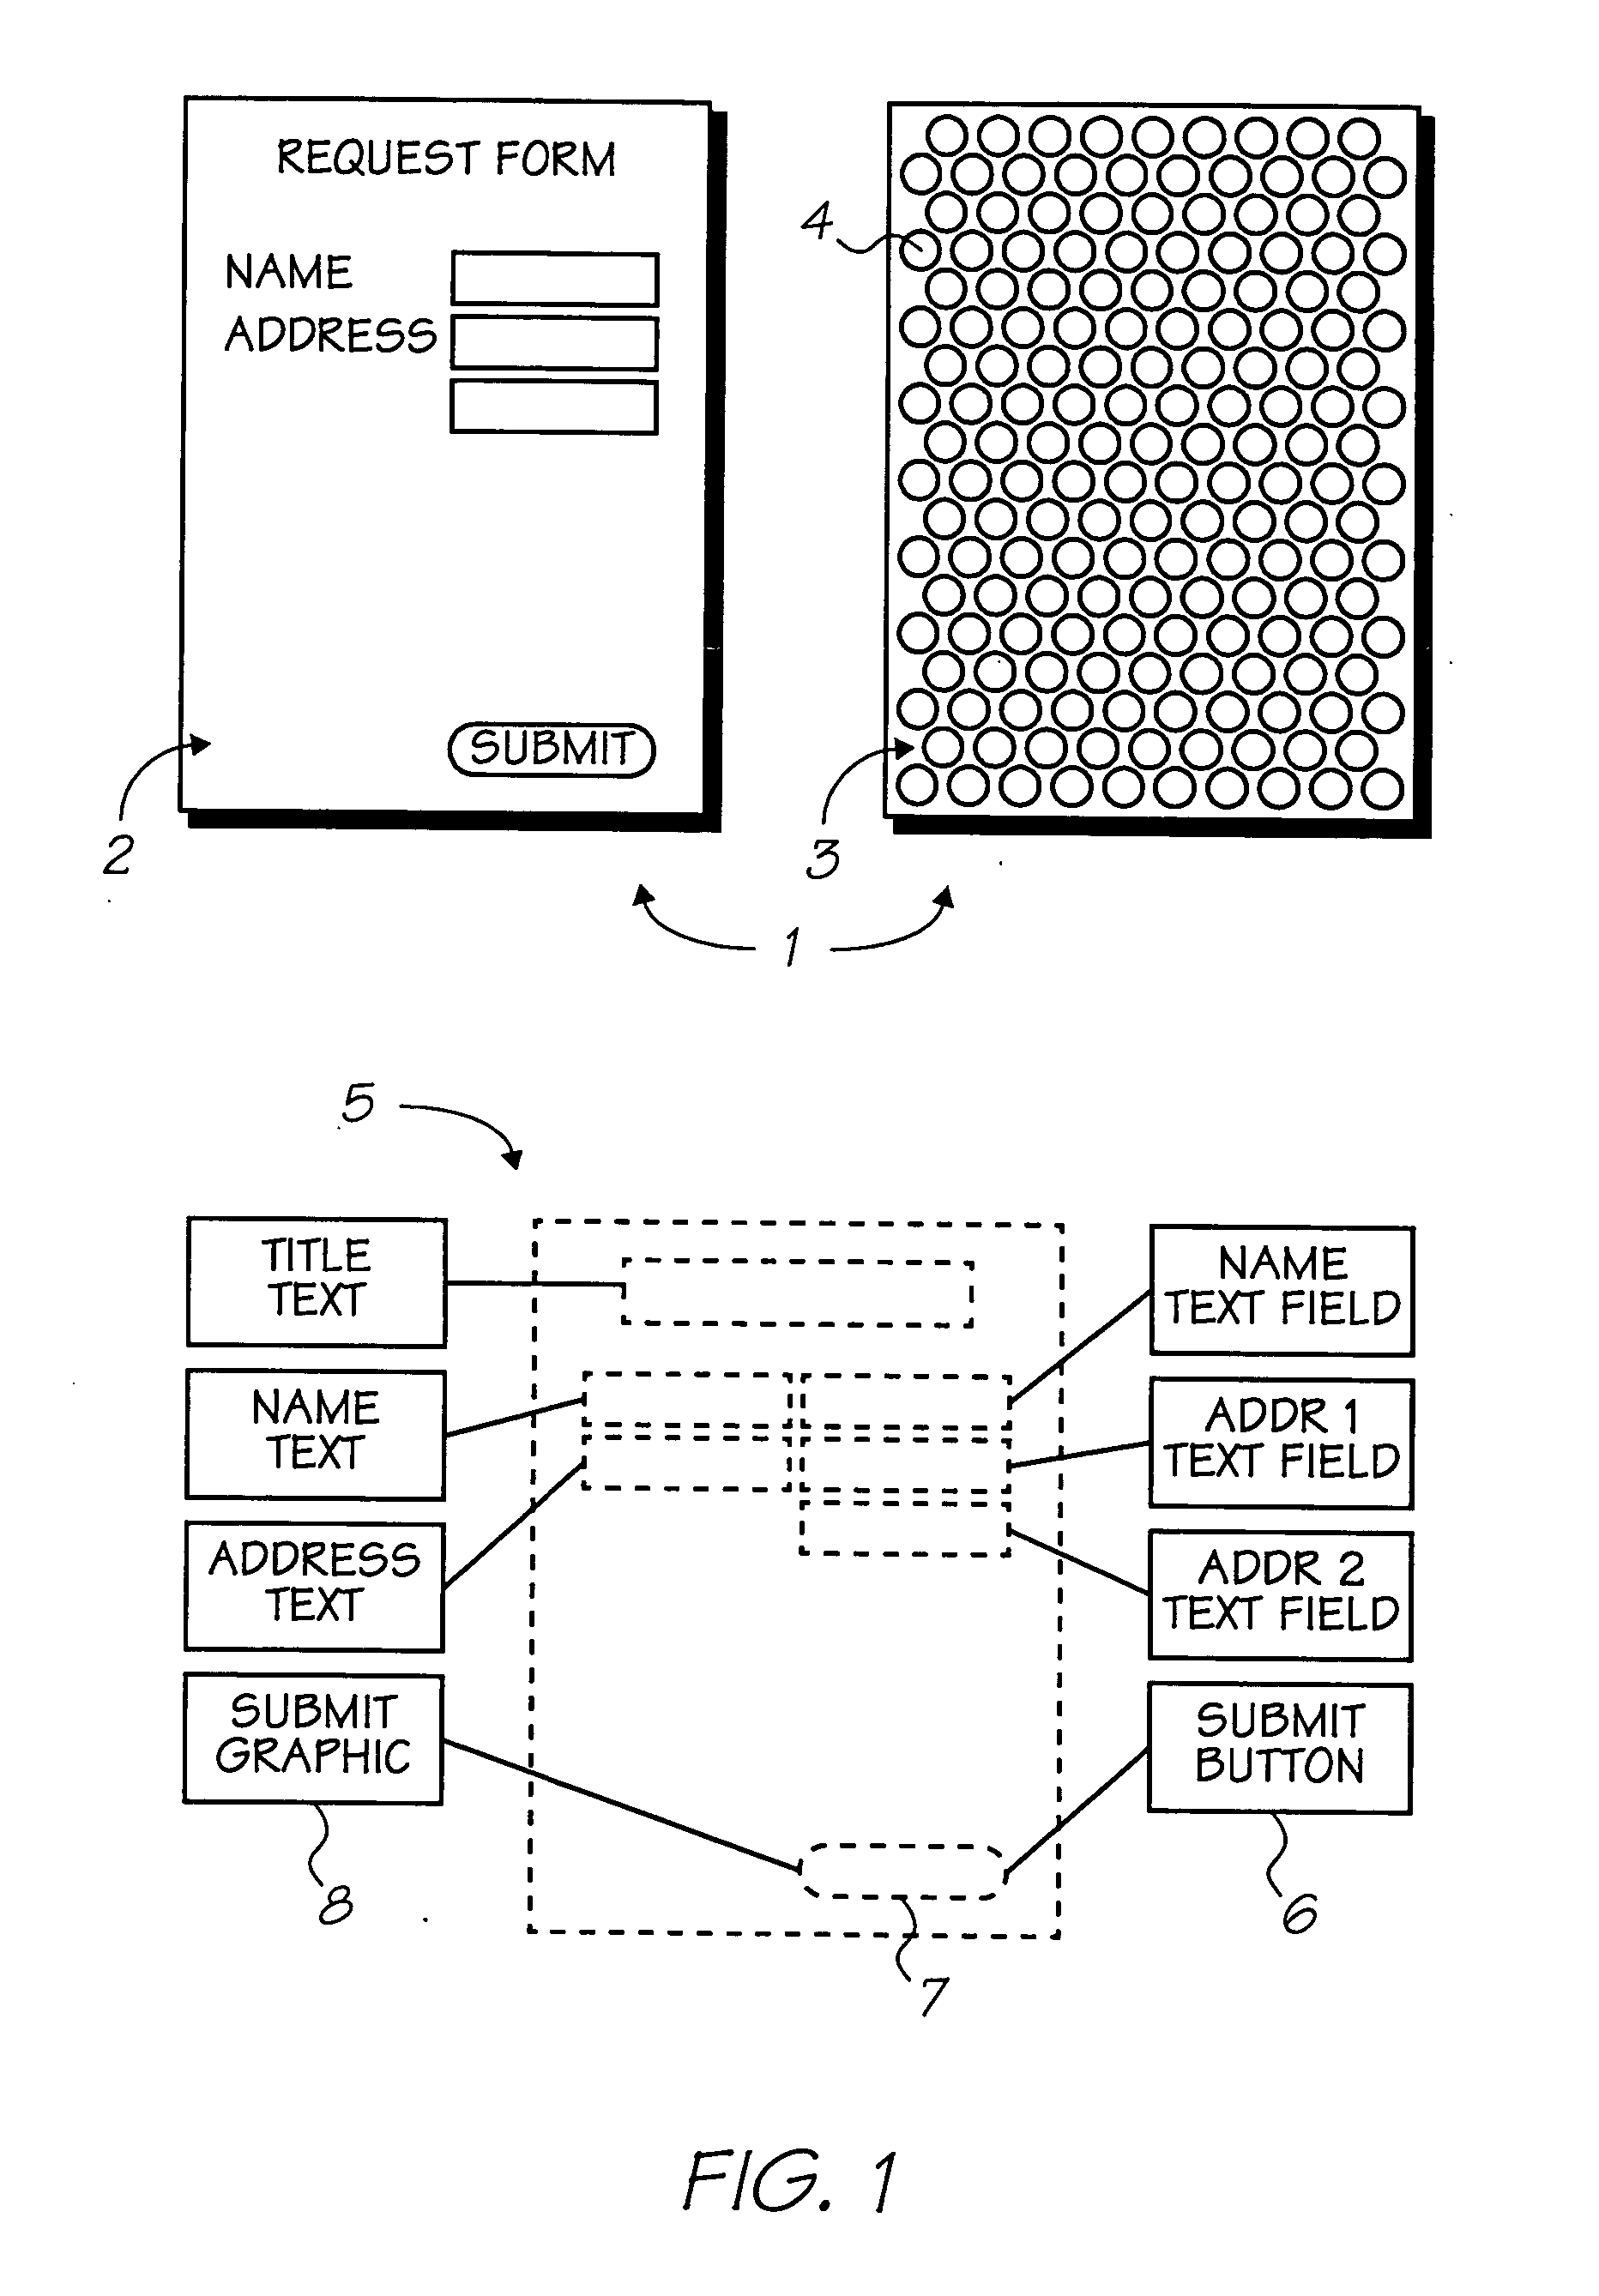 Scanning device for coded data